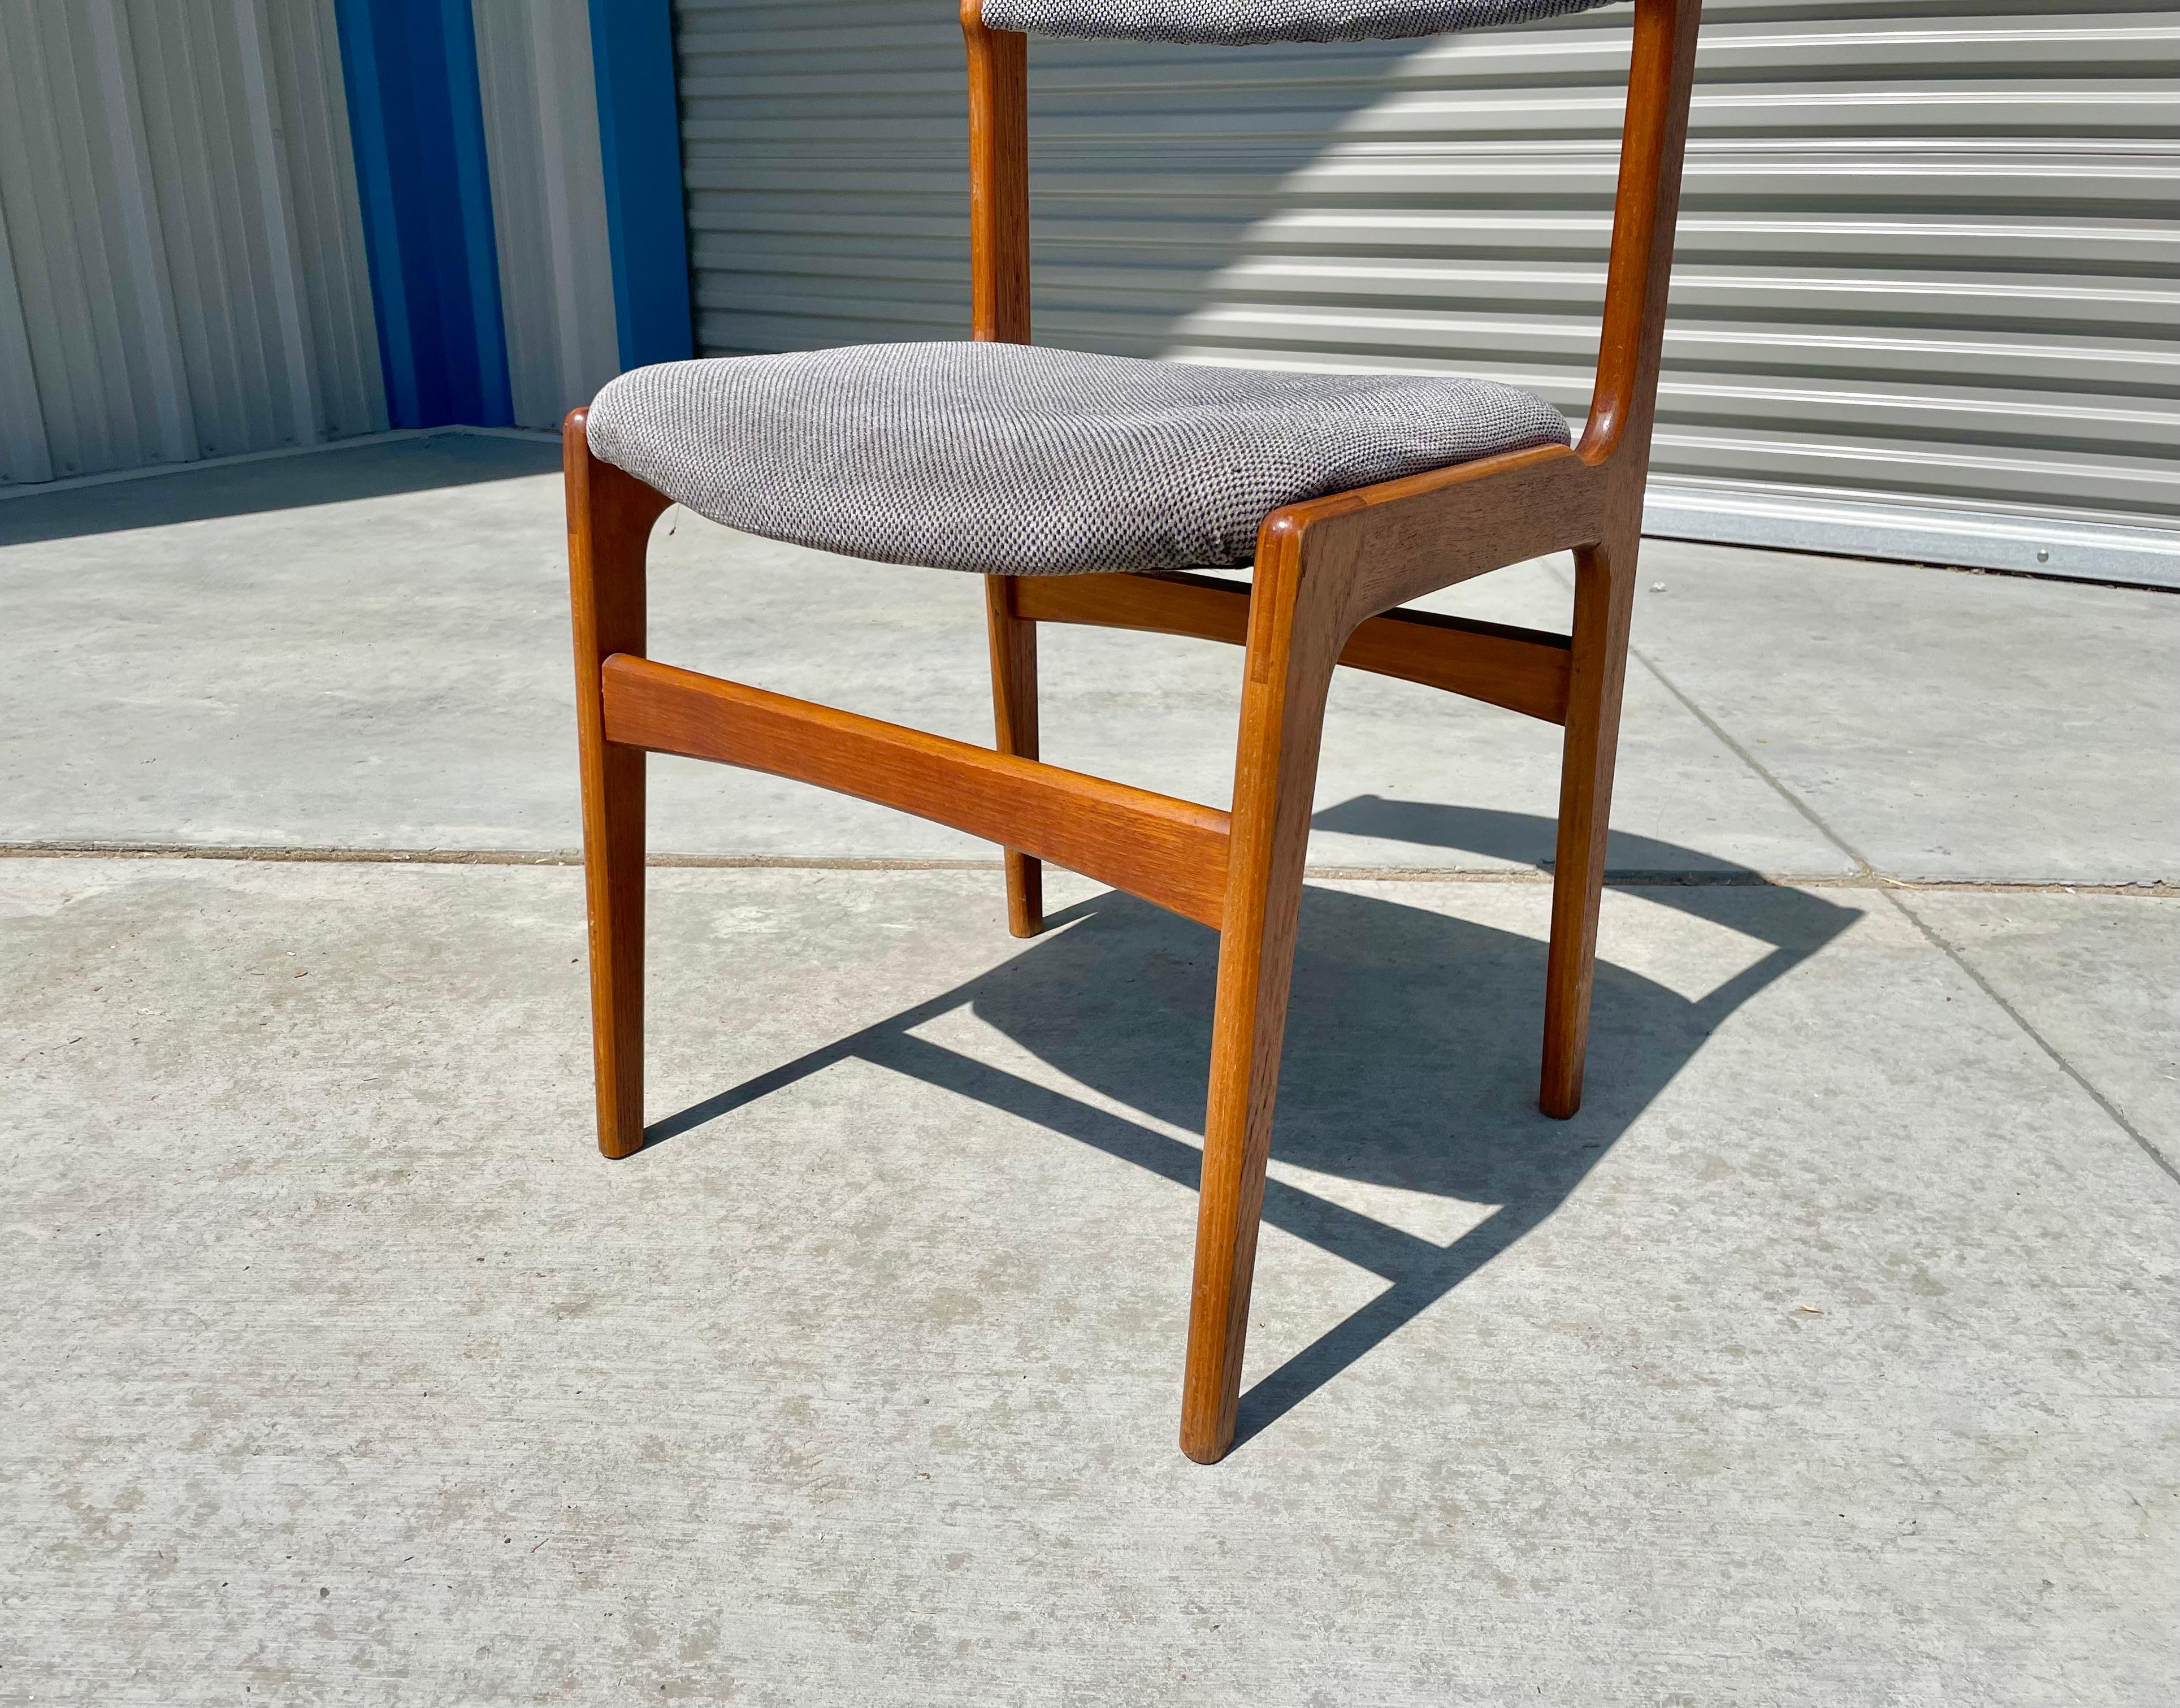 1960s Danish Modern Teak Dining Chairs - Set of 6 For Sale 5